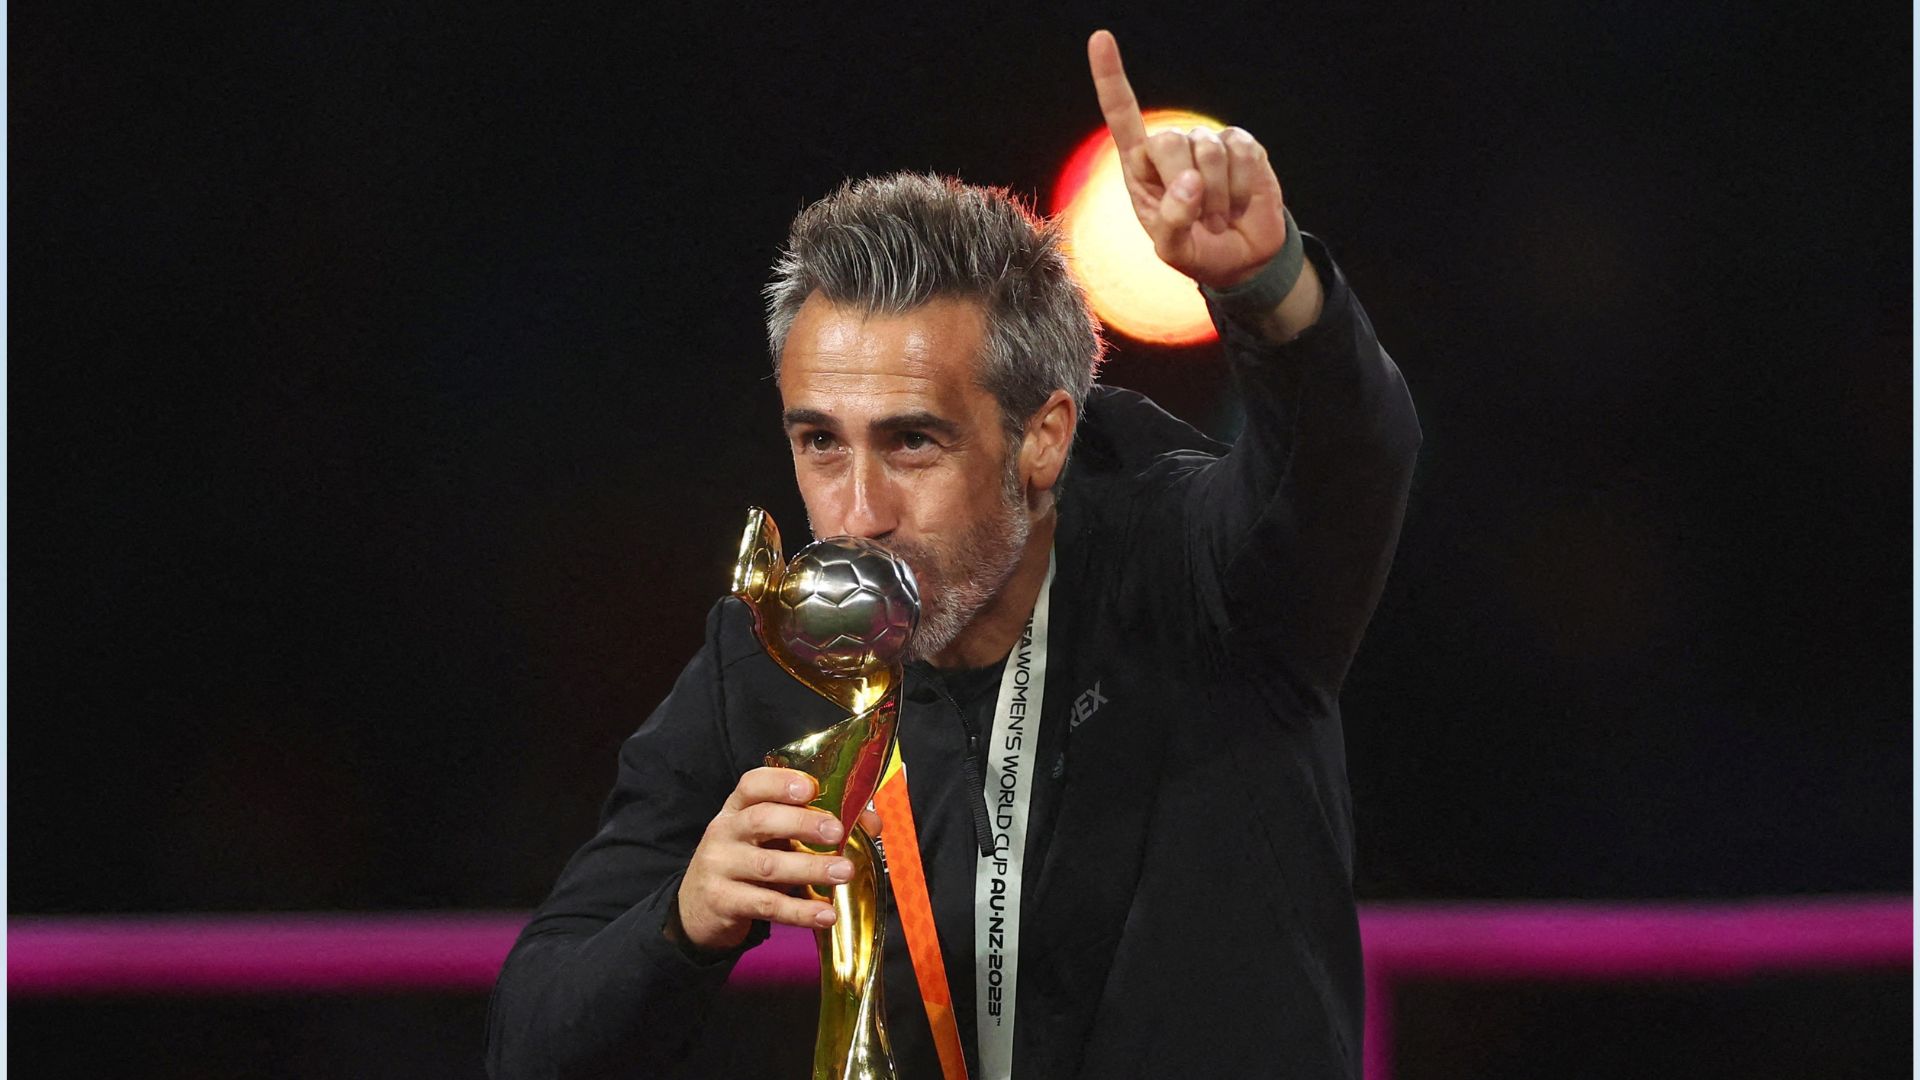 Dismissed coach Jorge Vilda celebrates with the trophy after winning the World Cup. /Carl Recine/Reuters